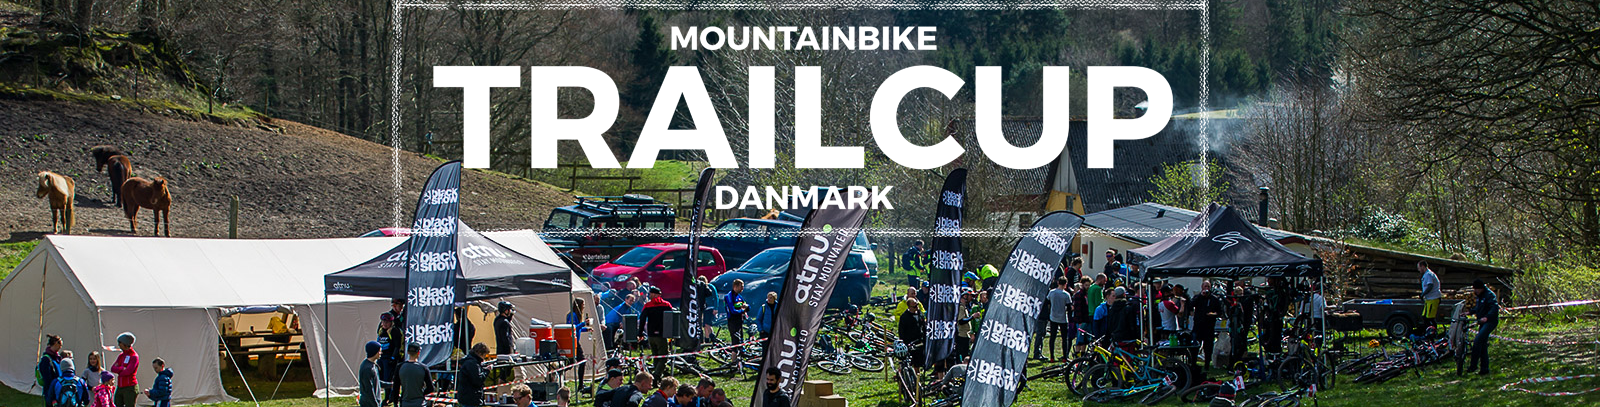 Mountainbike Trailcup 2018